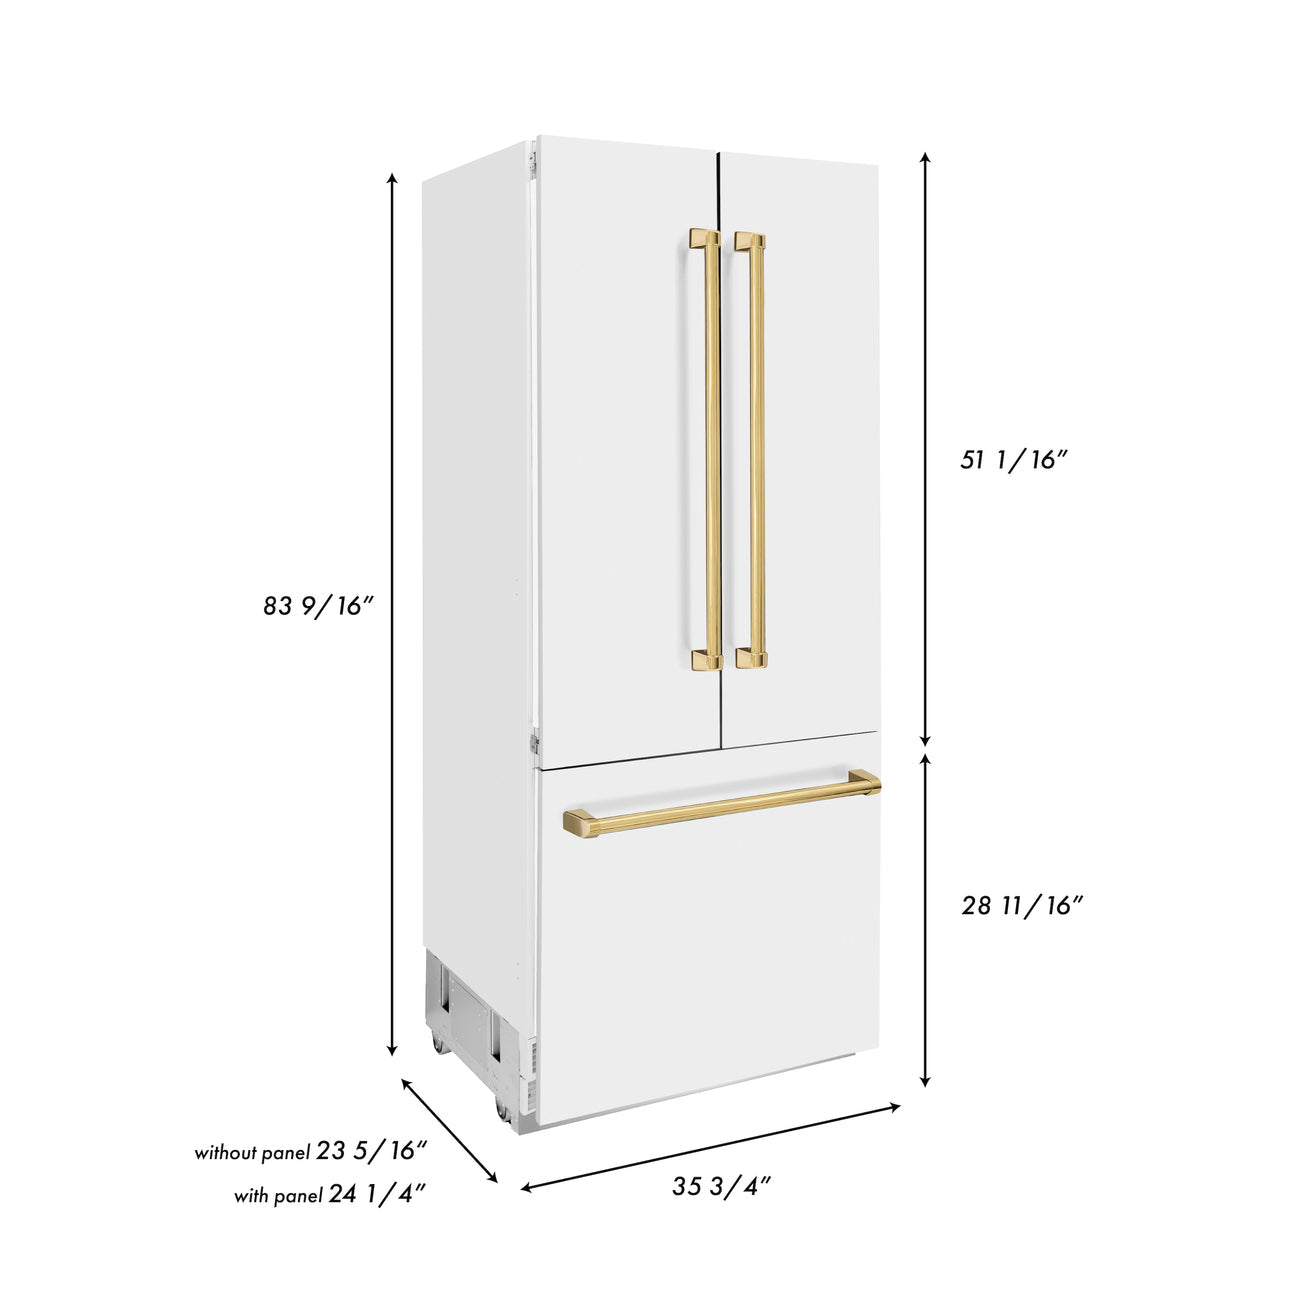 ZLINE 36 in. Autograph Edition 19.6 cu. ft. Built-in 2-Door Bottom Freezer Refrigerator with Internal Water and Ice Dispenser in White Matte with Gold Accents (RBIVZ-WM-36-G)